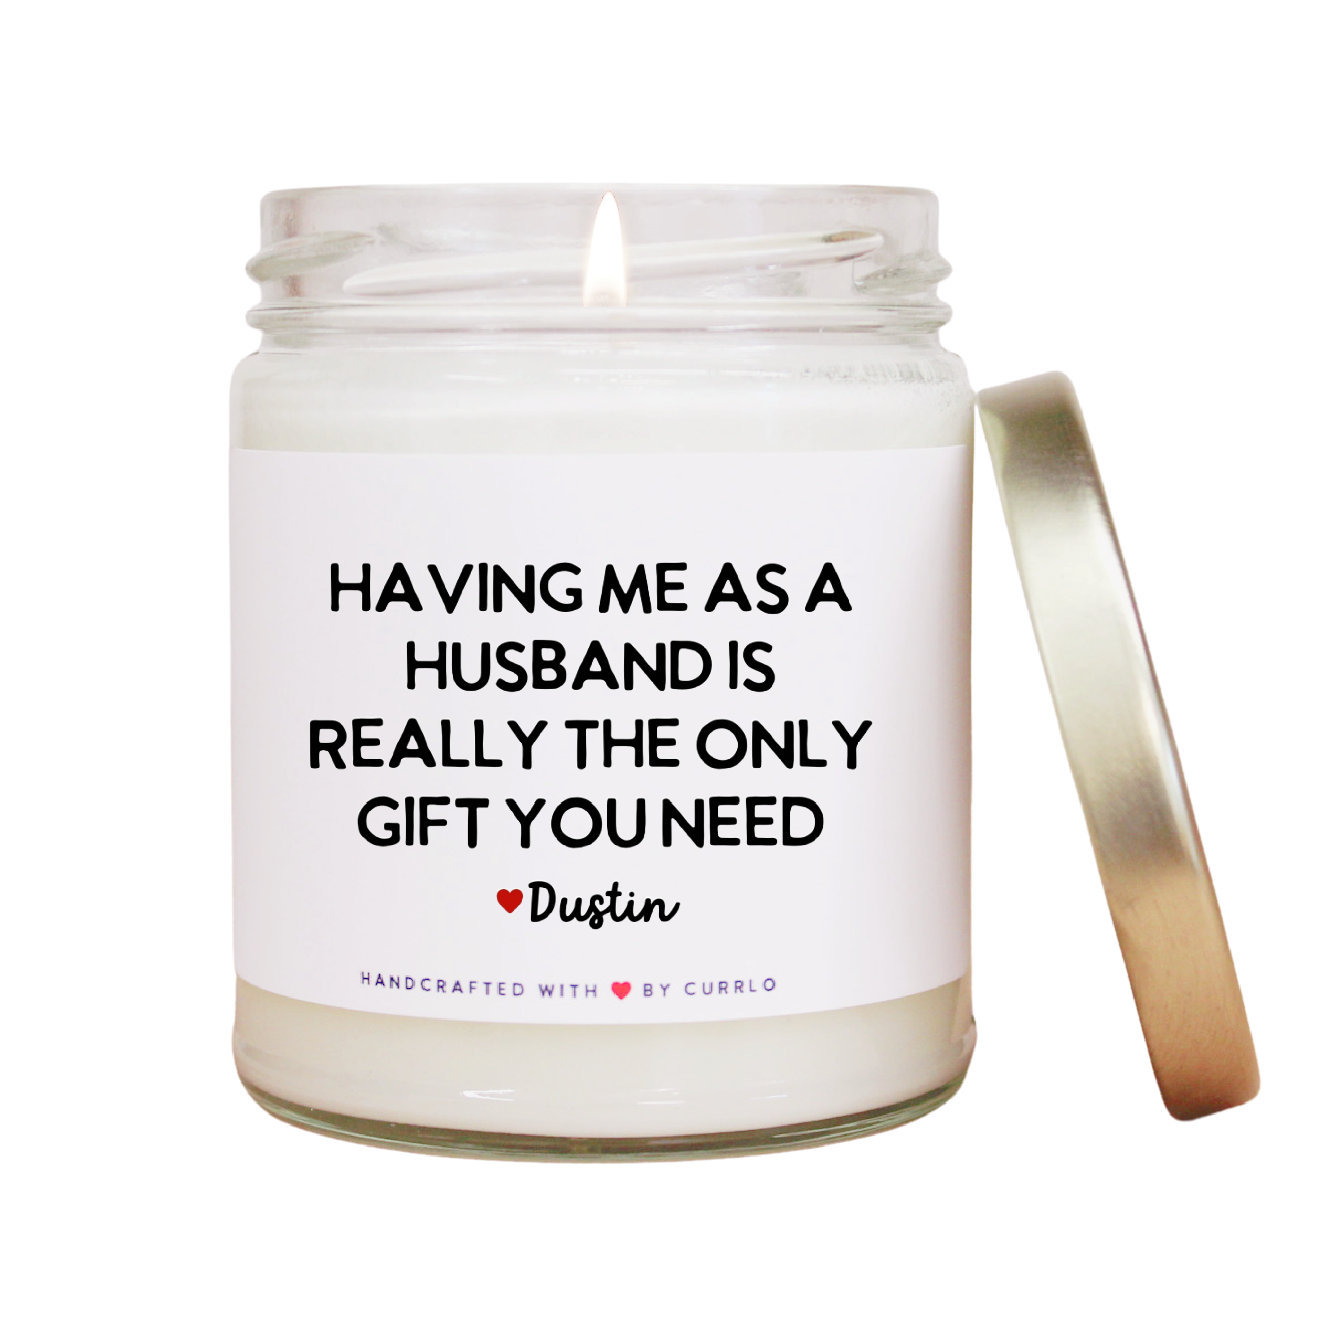 Discover Christmas Gift For Wife - Wife Birthday Gift from Husband - Funny Gifts for Wife - Funny Anniversary Gifts - Candle for Wife - Wife Gifts